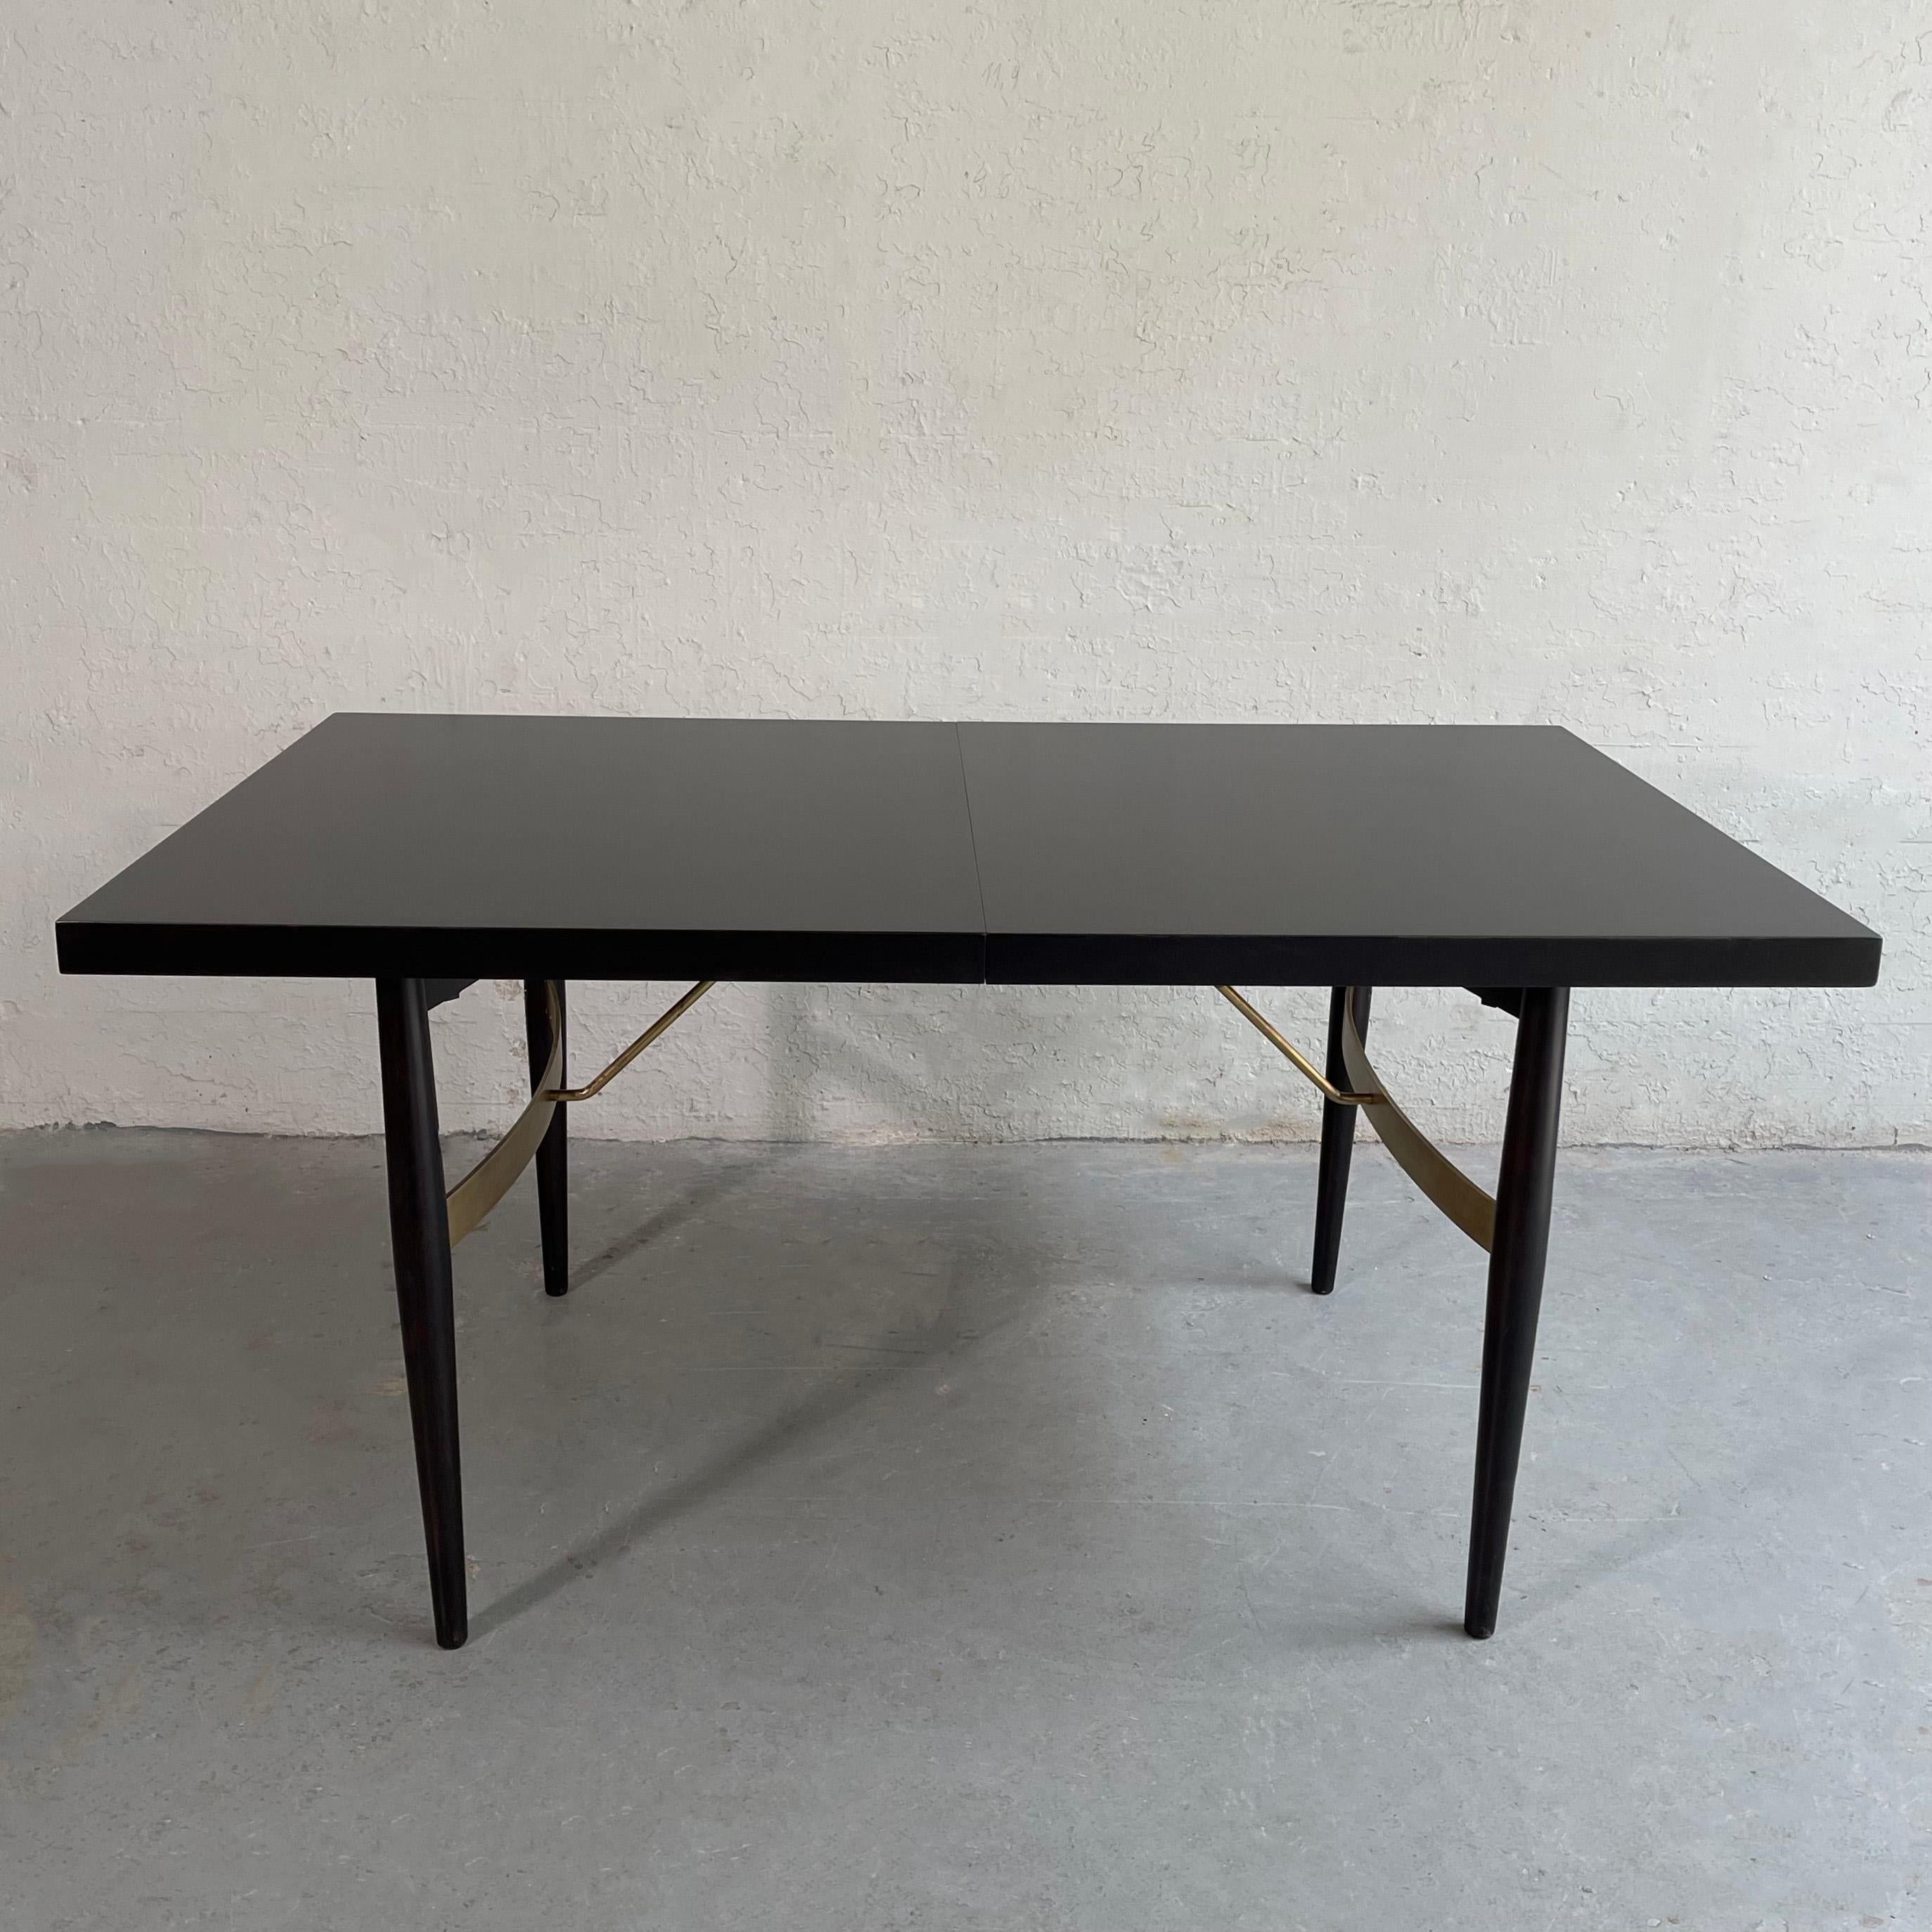 Midcentury modern, dining table in the style of T.H. Robsjohn-Gibbings features an 2 inch thick, ebonized mahogany top with maple legs and brass bracing. 